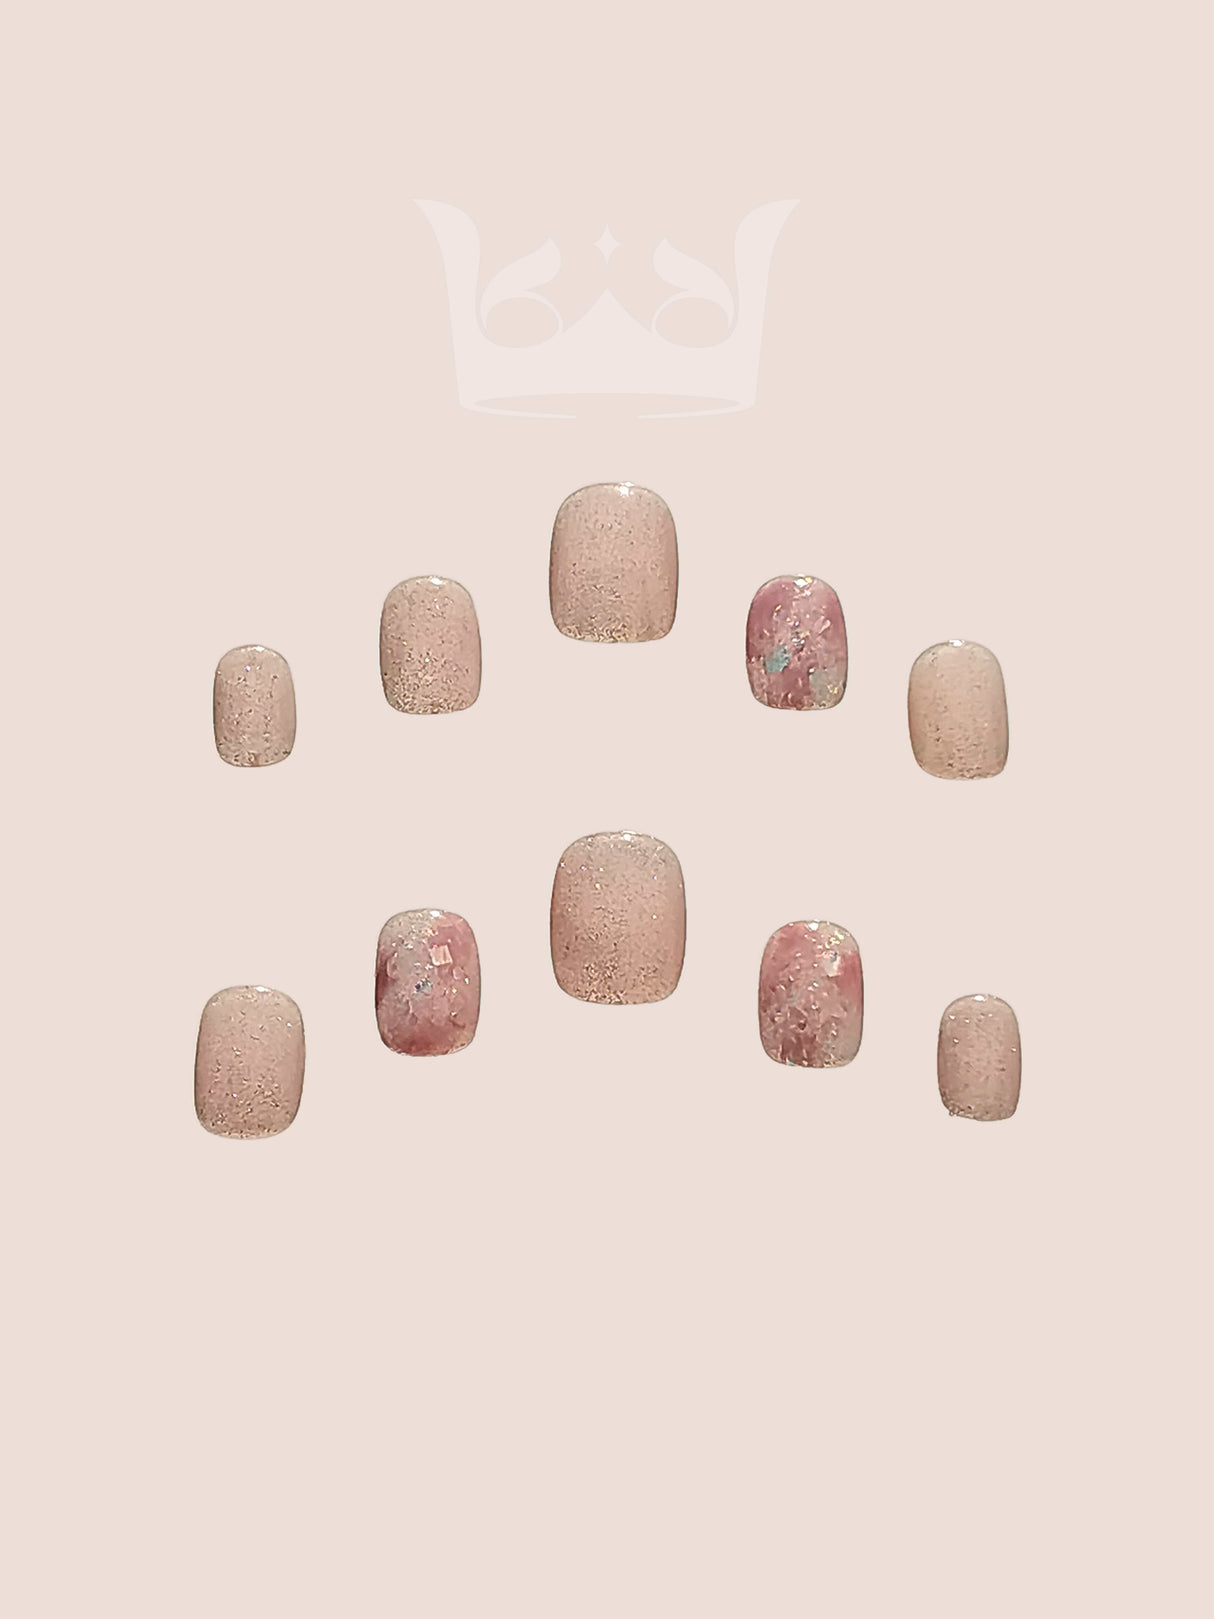 These press-on nails are perfect for special occasions, with a soft pink color, delicate white accents, shimmering finish, iridescent flakes, and a classic shape.